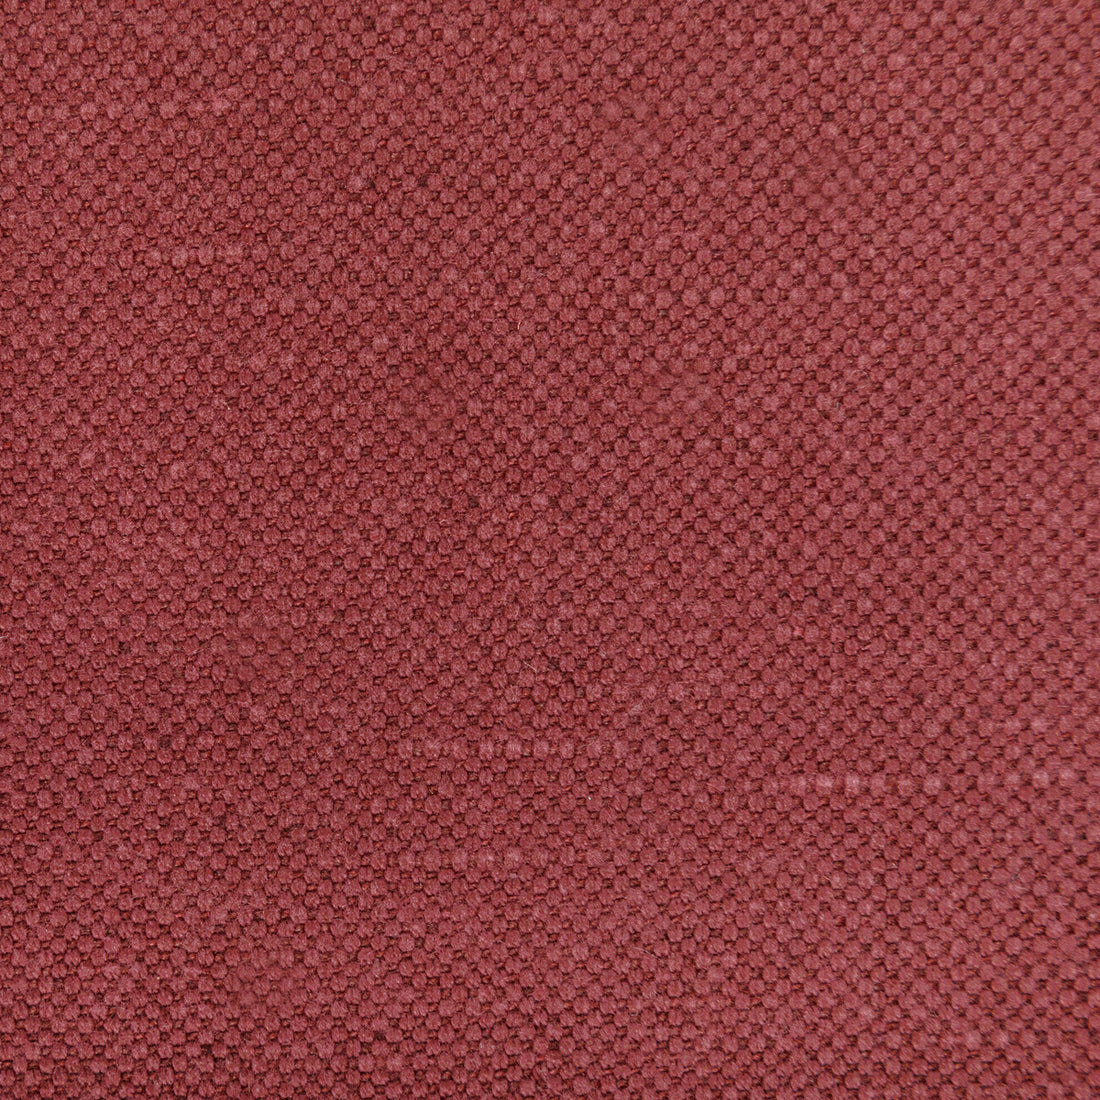 Carson fabric in rouge color - pattern 36282.910.0 - by Kravet Basics